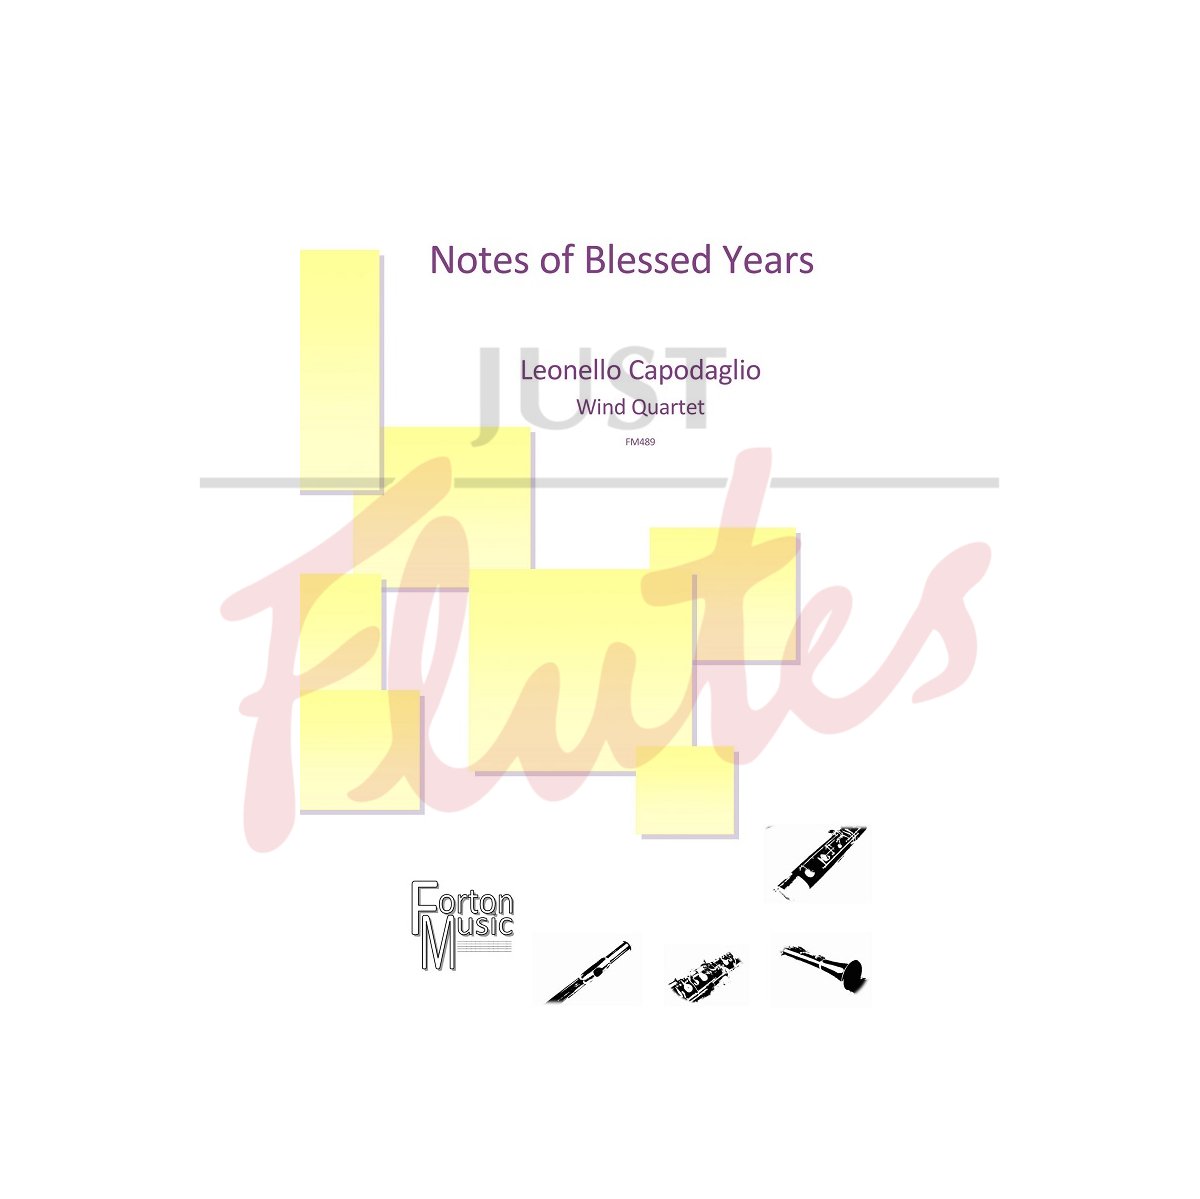 Notes of Blessed Years